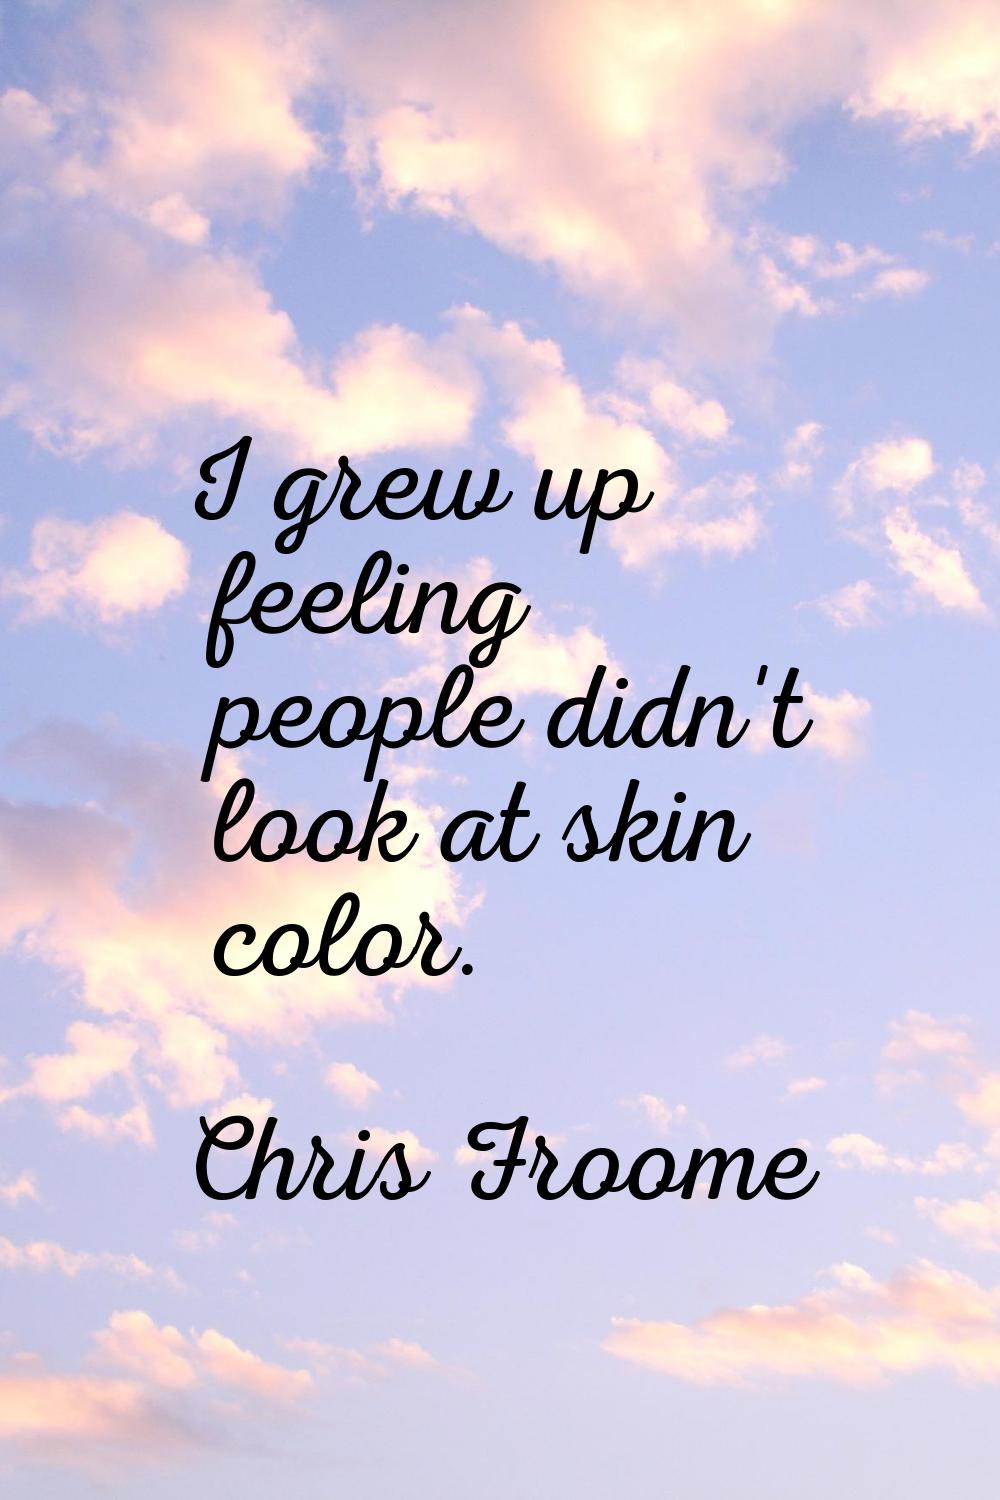 I grew up feeling people didn't look at skin color.